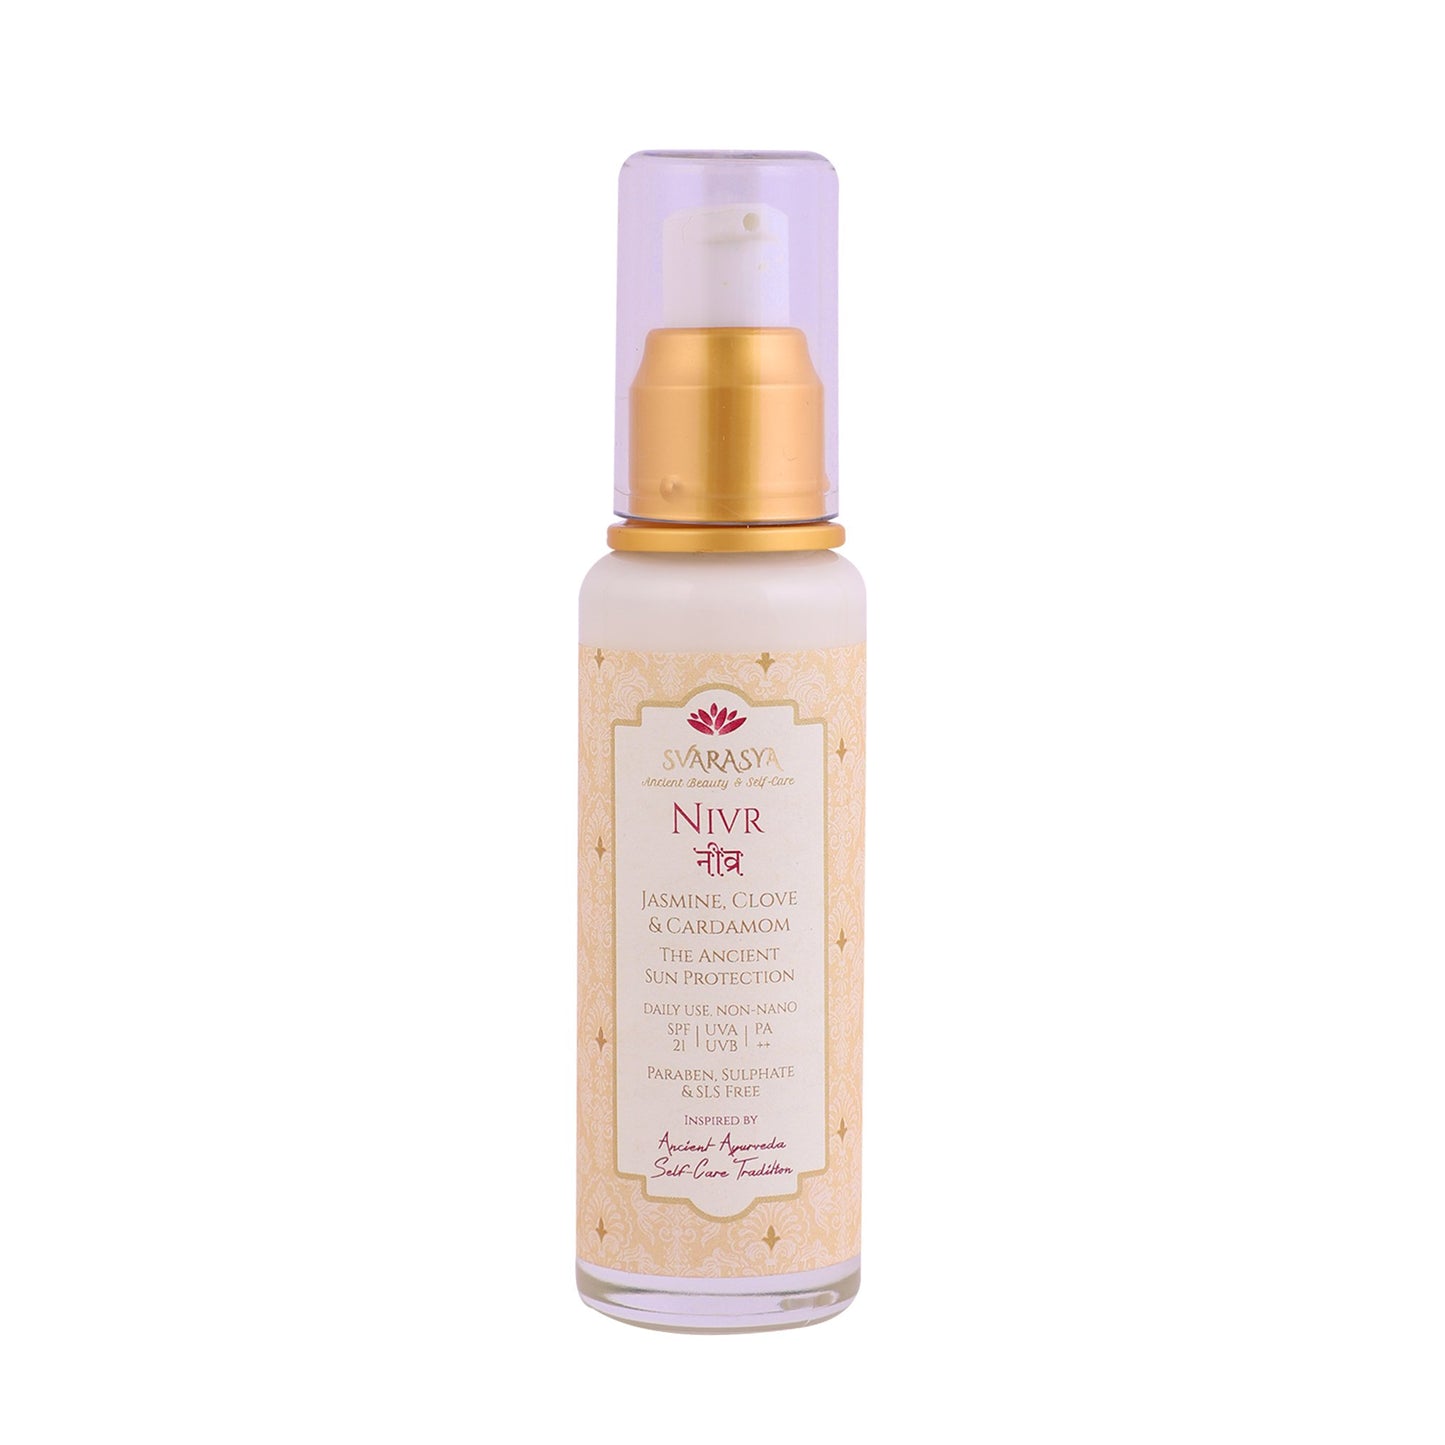 NIVR - NATURAL SUN PROTECTION & PANCHPUSHP - THE ANCIENT SKIN HYDRATION (Pack of 2, 50 ml each)